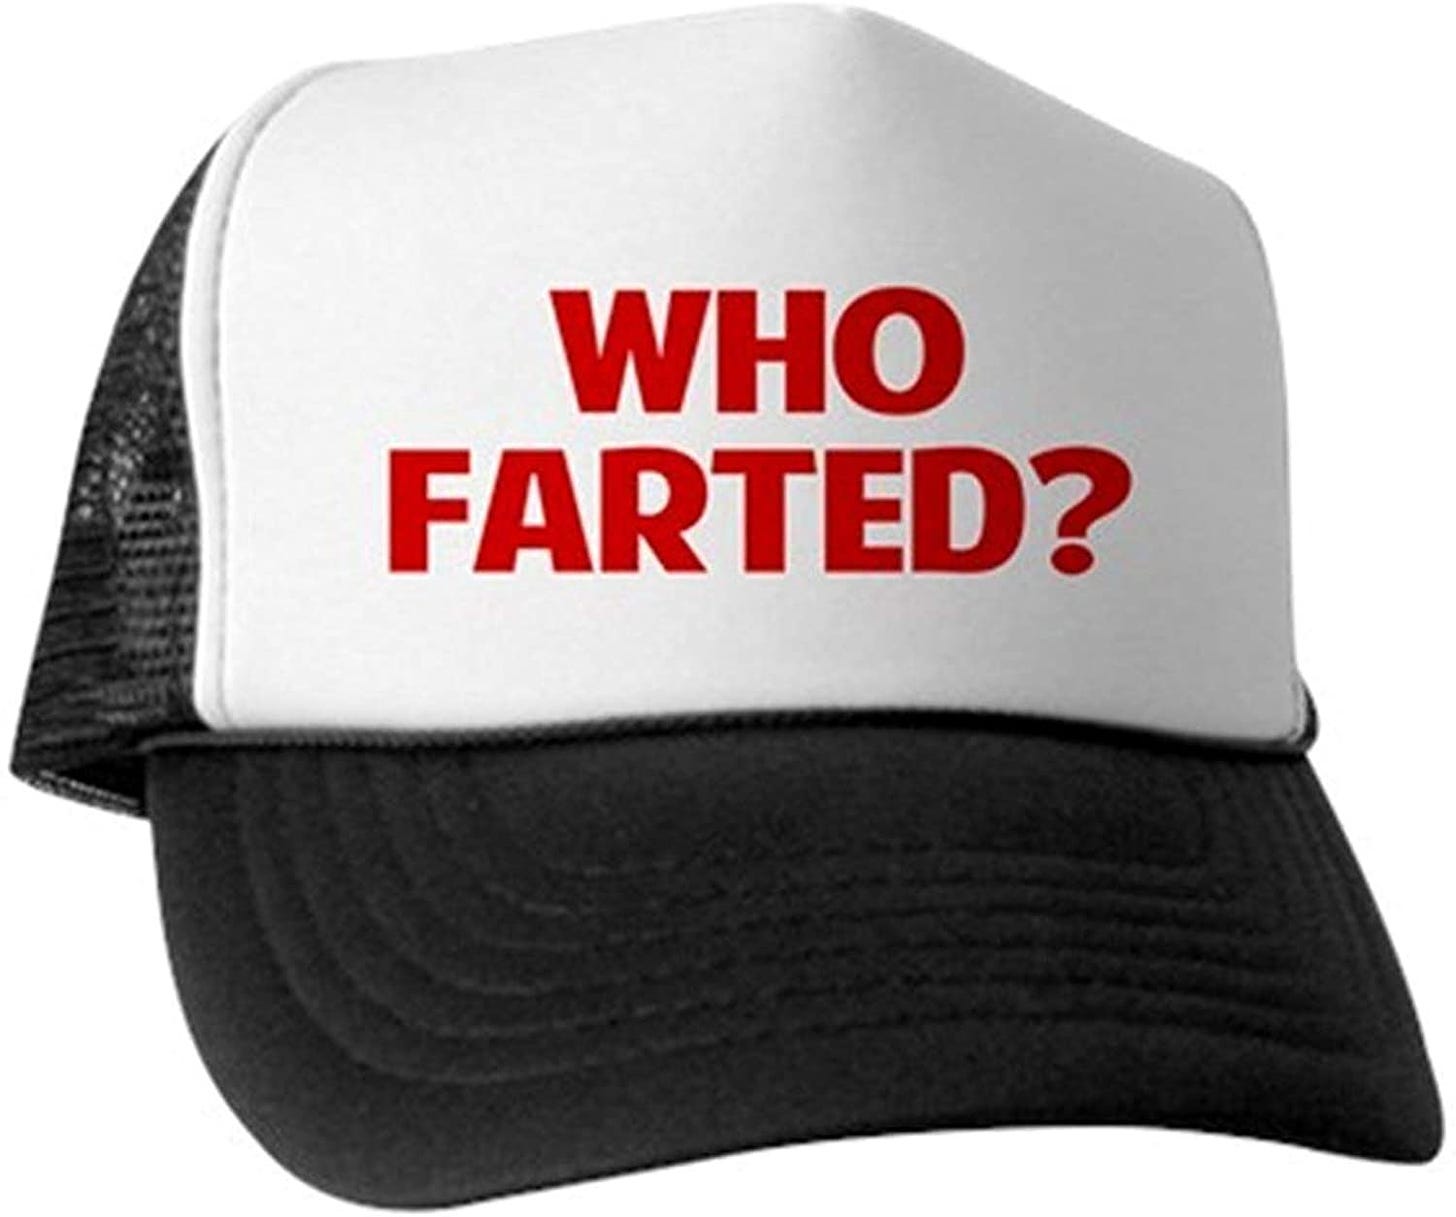 Image result for who farted hat